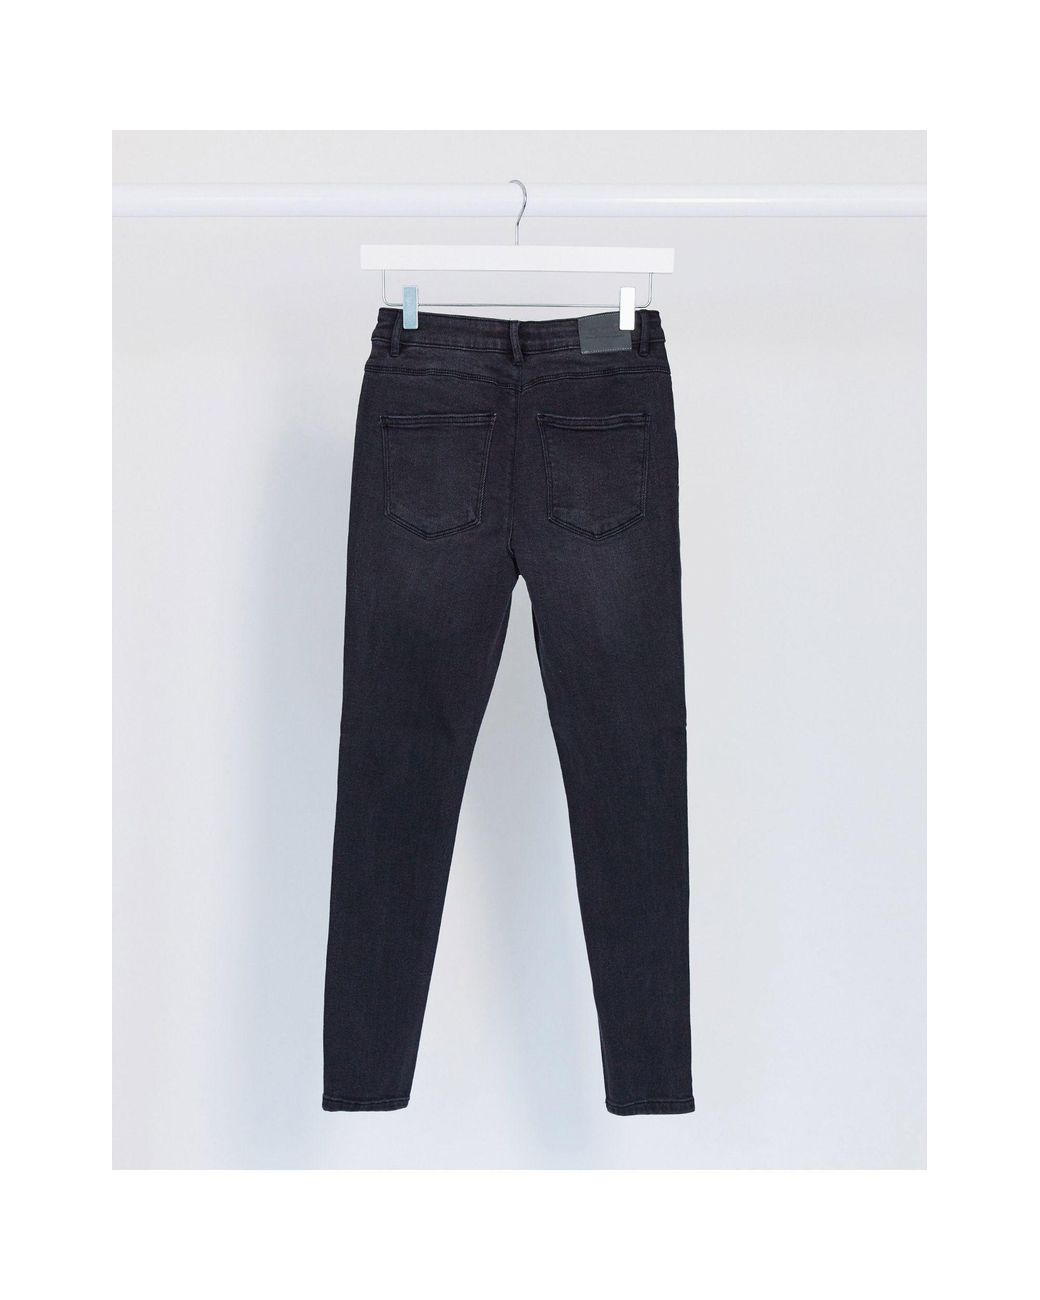 ONLY Denim Mila High Waisted Skinny Jeans in Black - Lyst